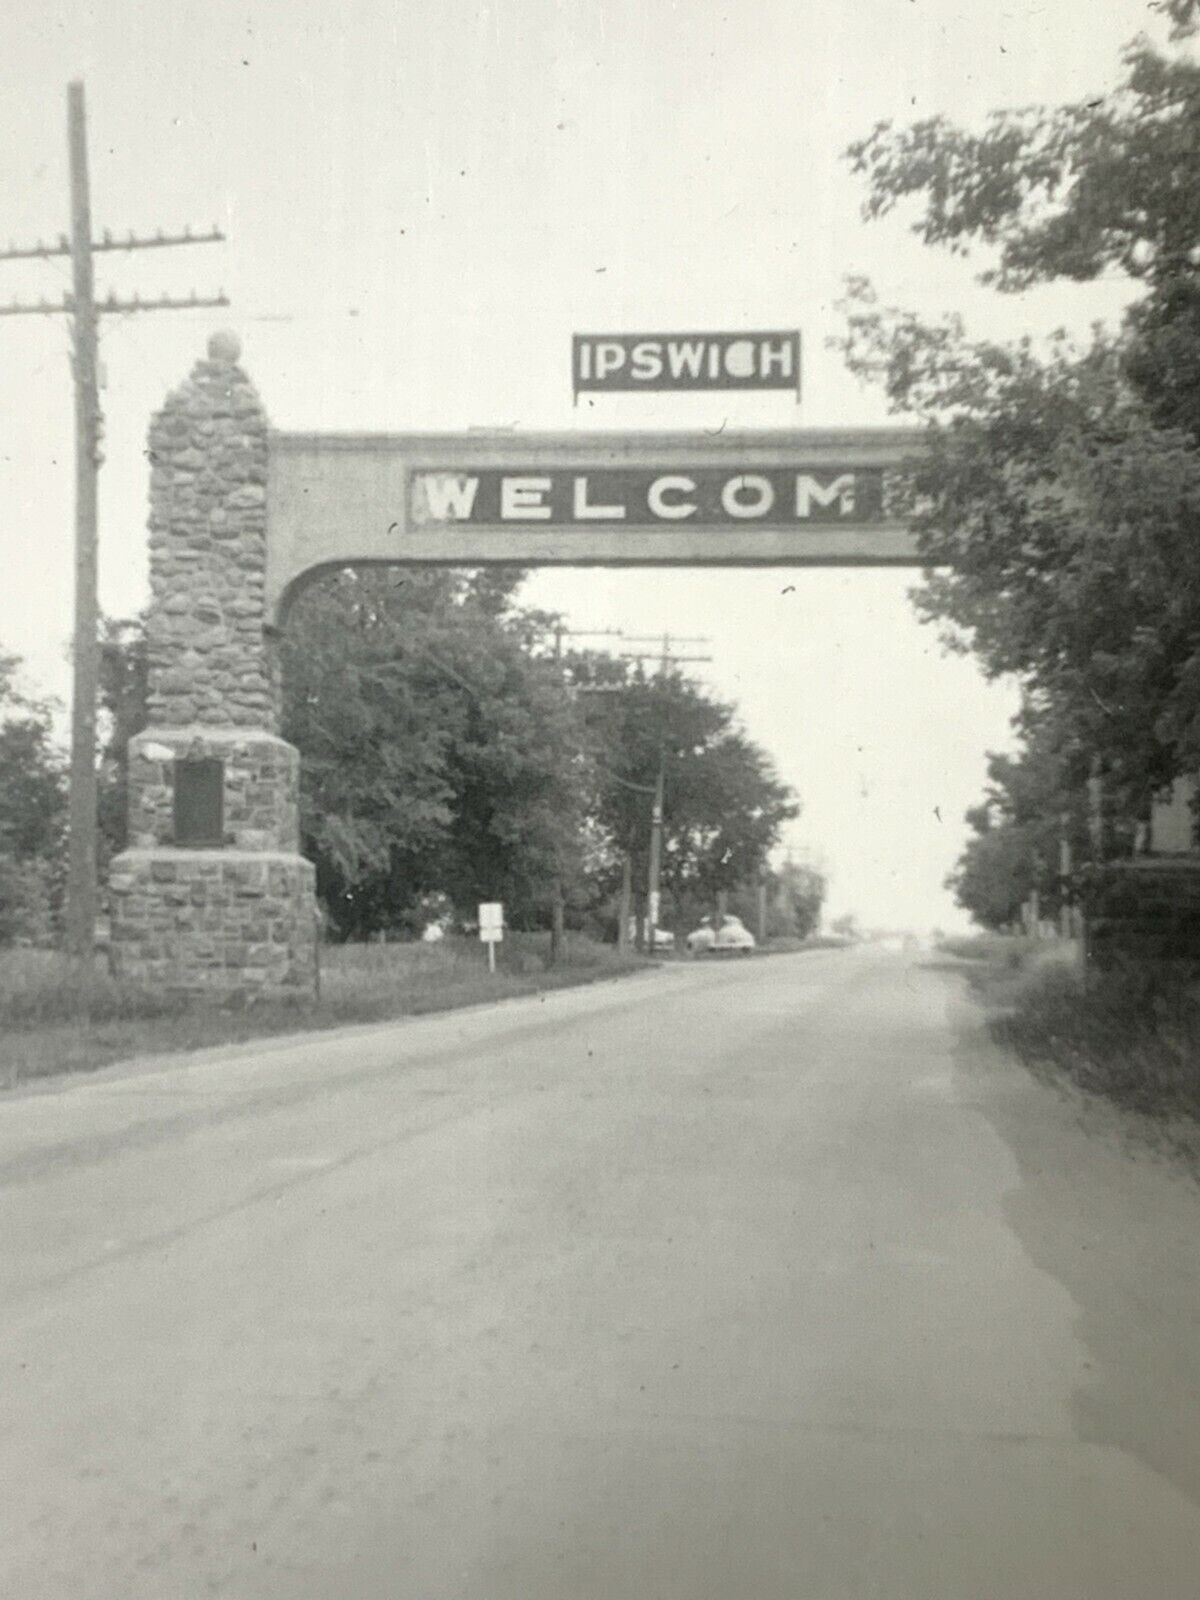 (AmH) FOUND Photo Photograph Vintage Welcome To Ipswish SD Stone Arch Sign